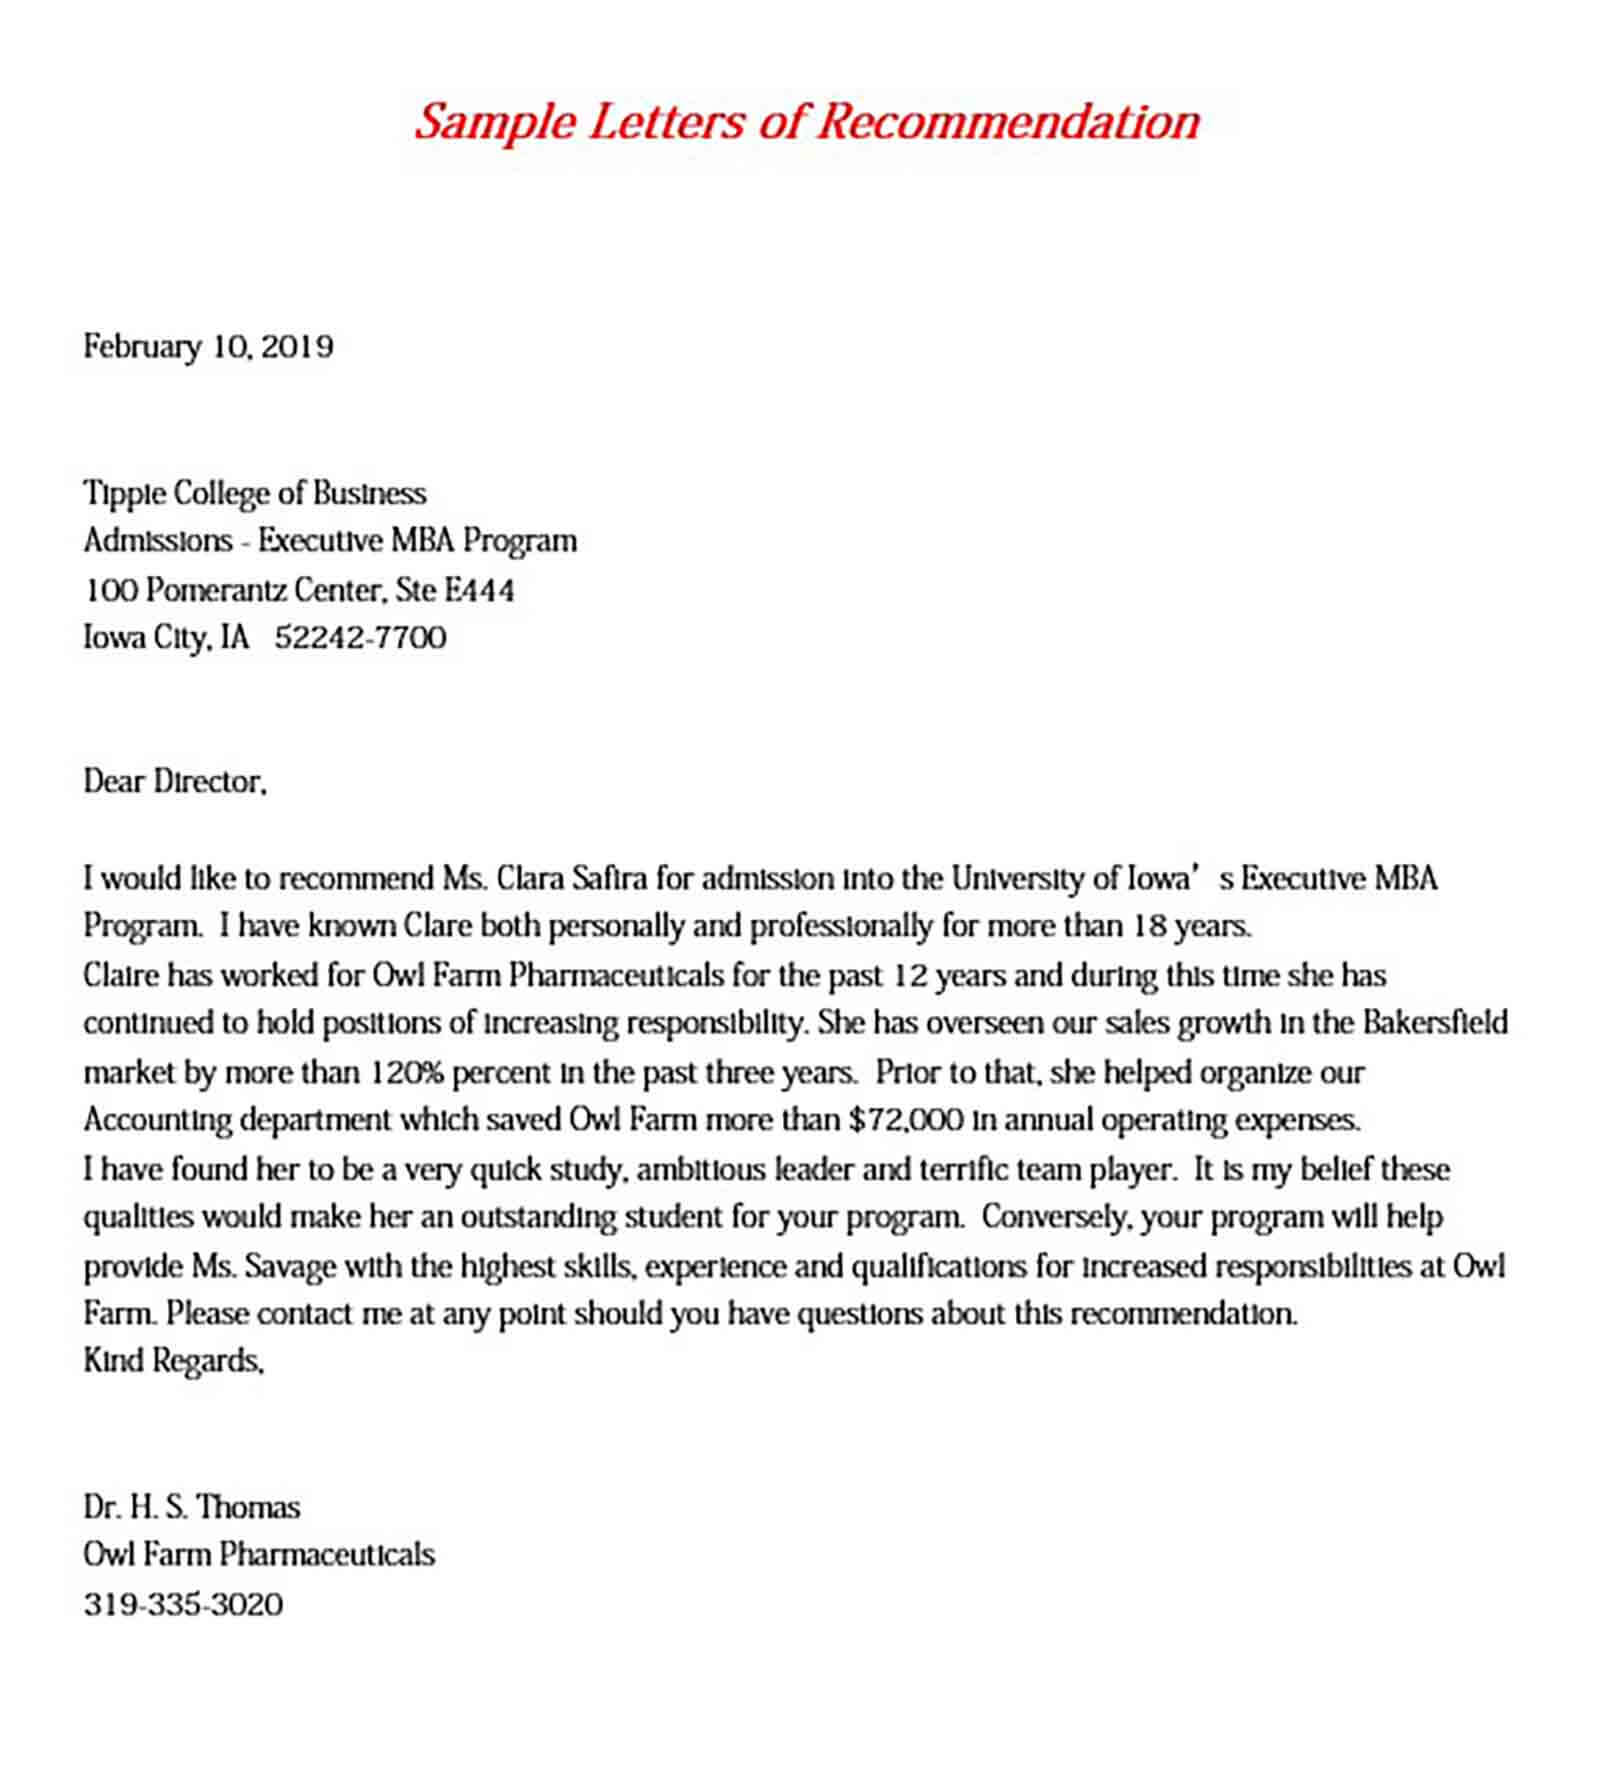 Recommendation Letter Sample For University from moussyusa.com